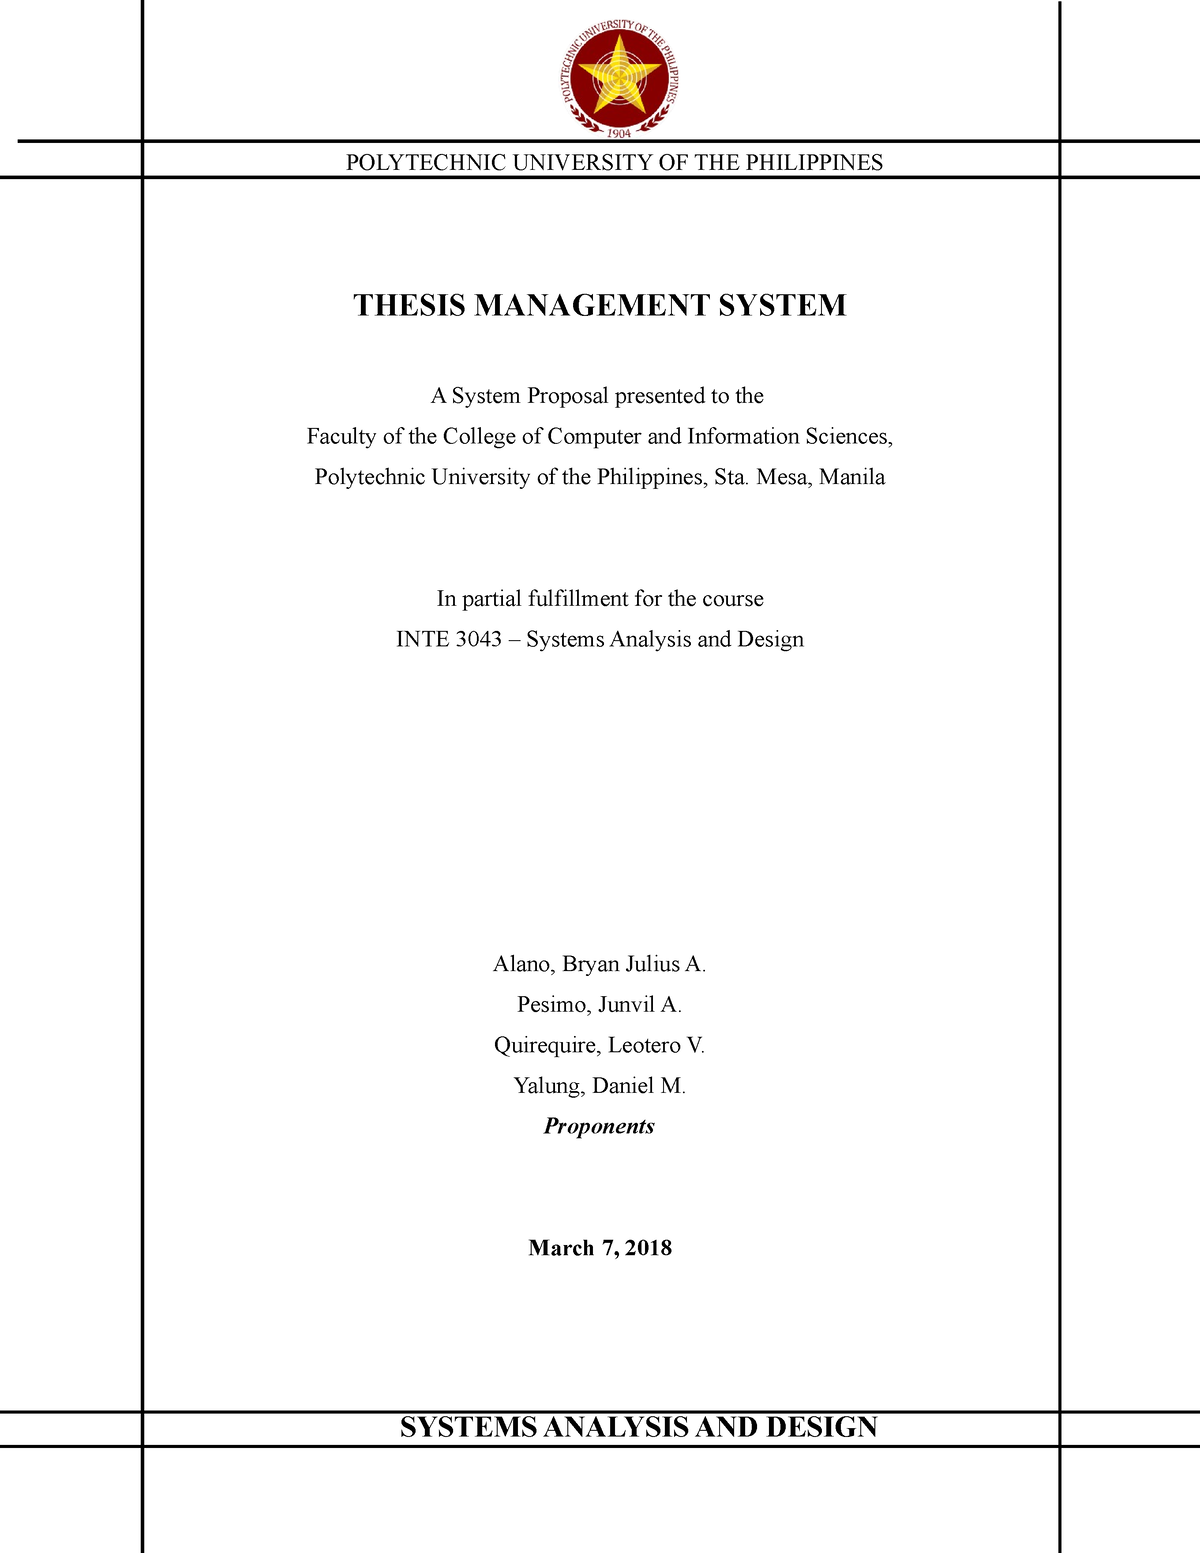 record management system thesis philippines